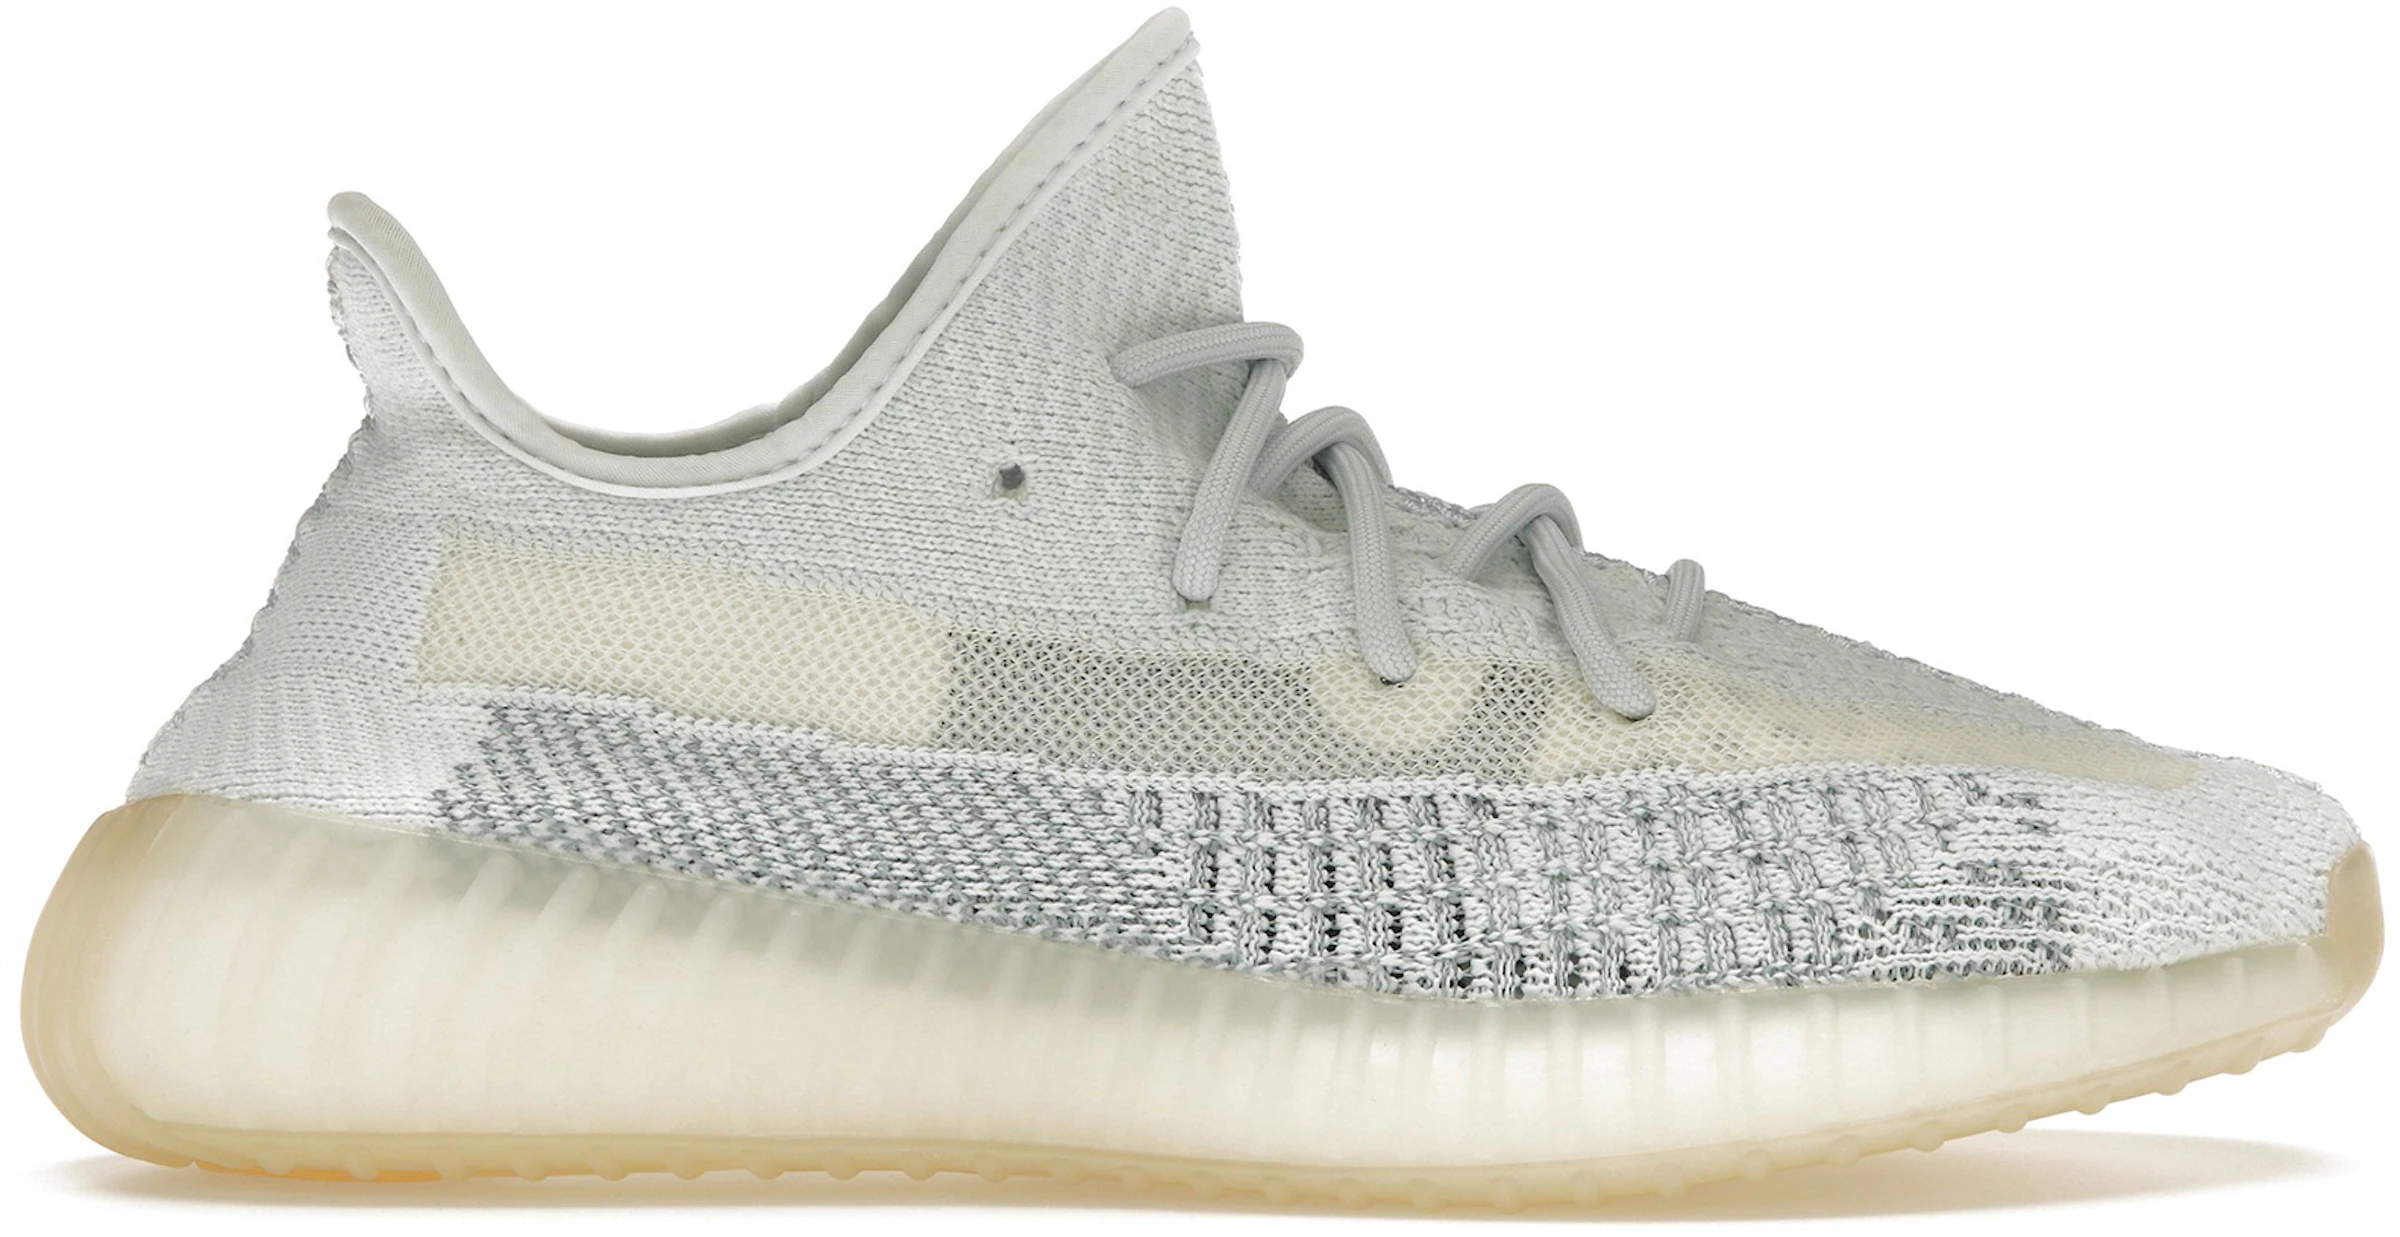 adidas Yeezy Boost 350 V2 Cloud White (Reflective) - FW5317 - US